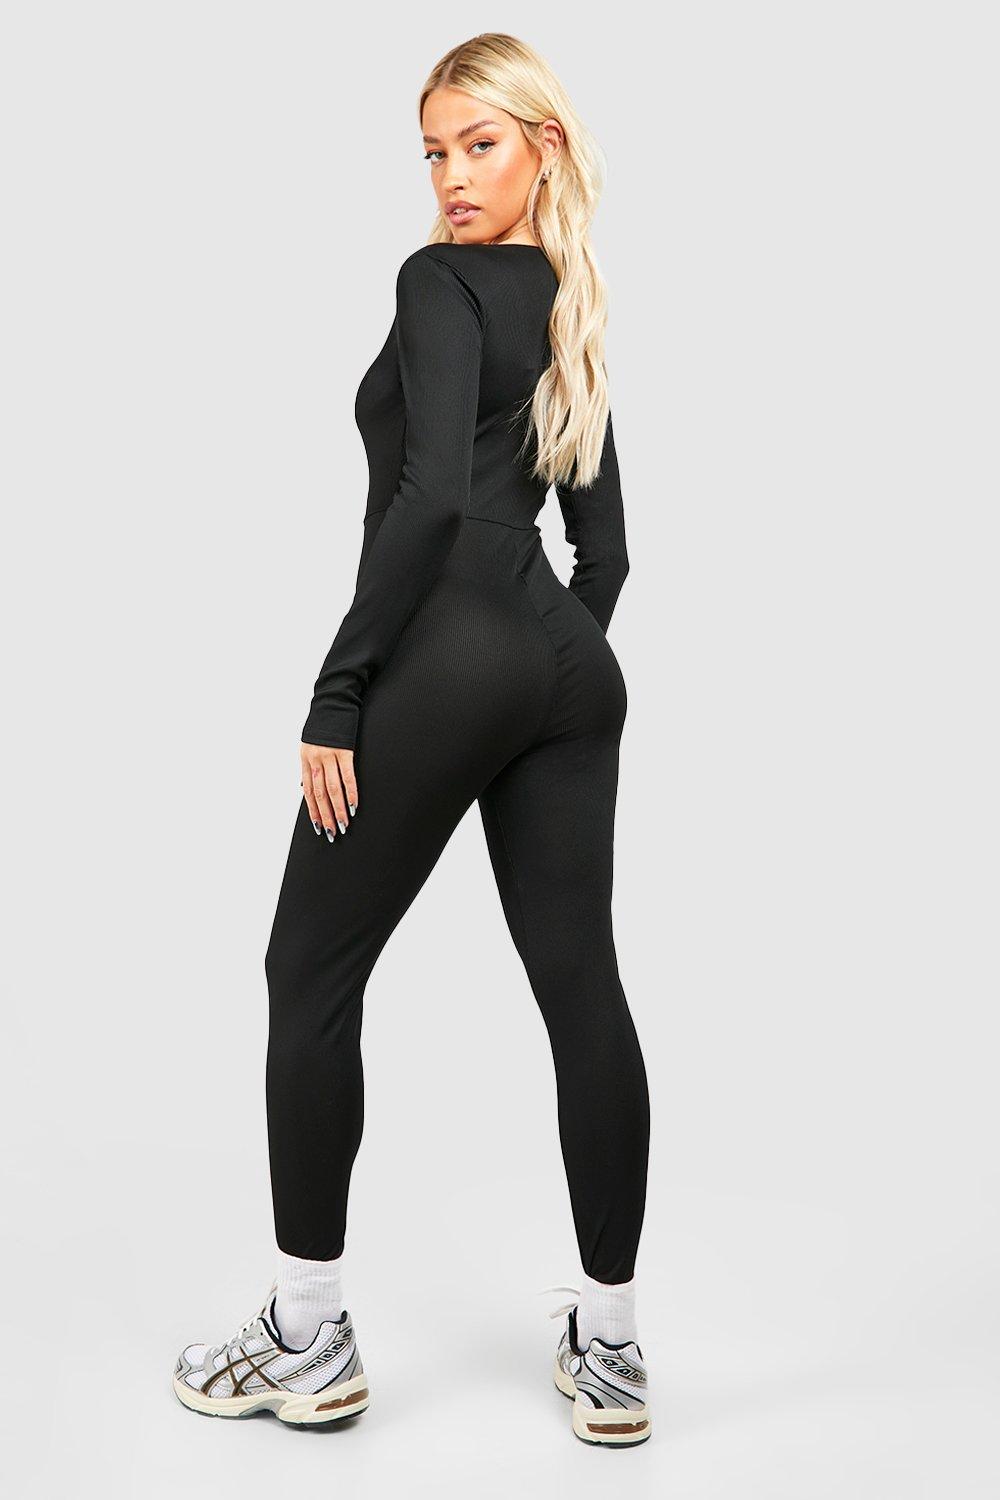 Women's Activewear: Ribbed Long Sleeve Yoga Bodysuit With Back Zip & Shorts  - Perfect for Gym Jumpsuit & Gym Training!